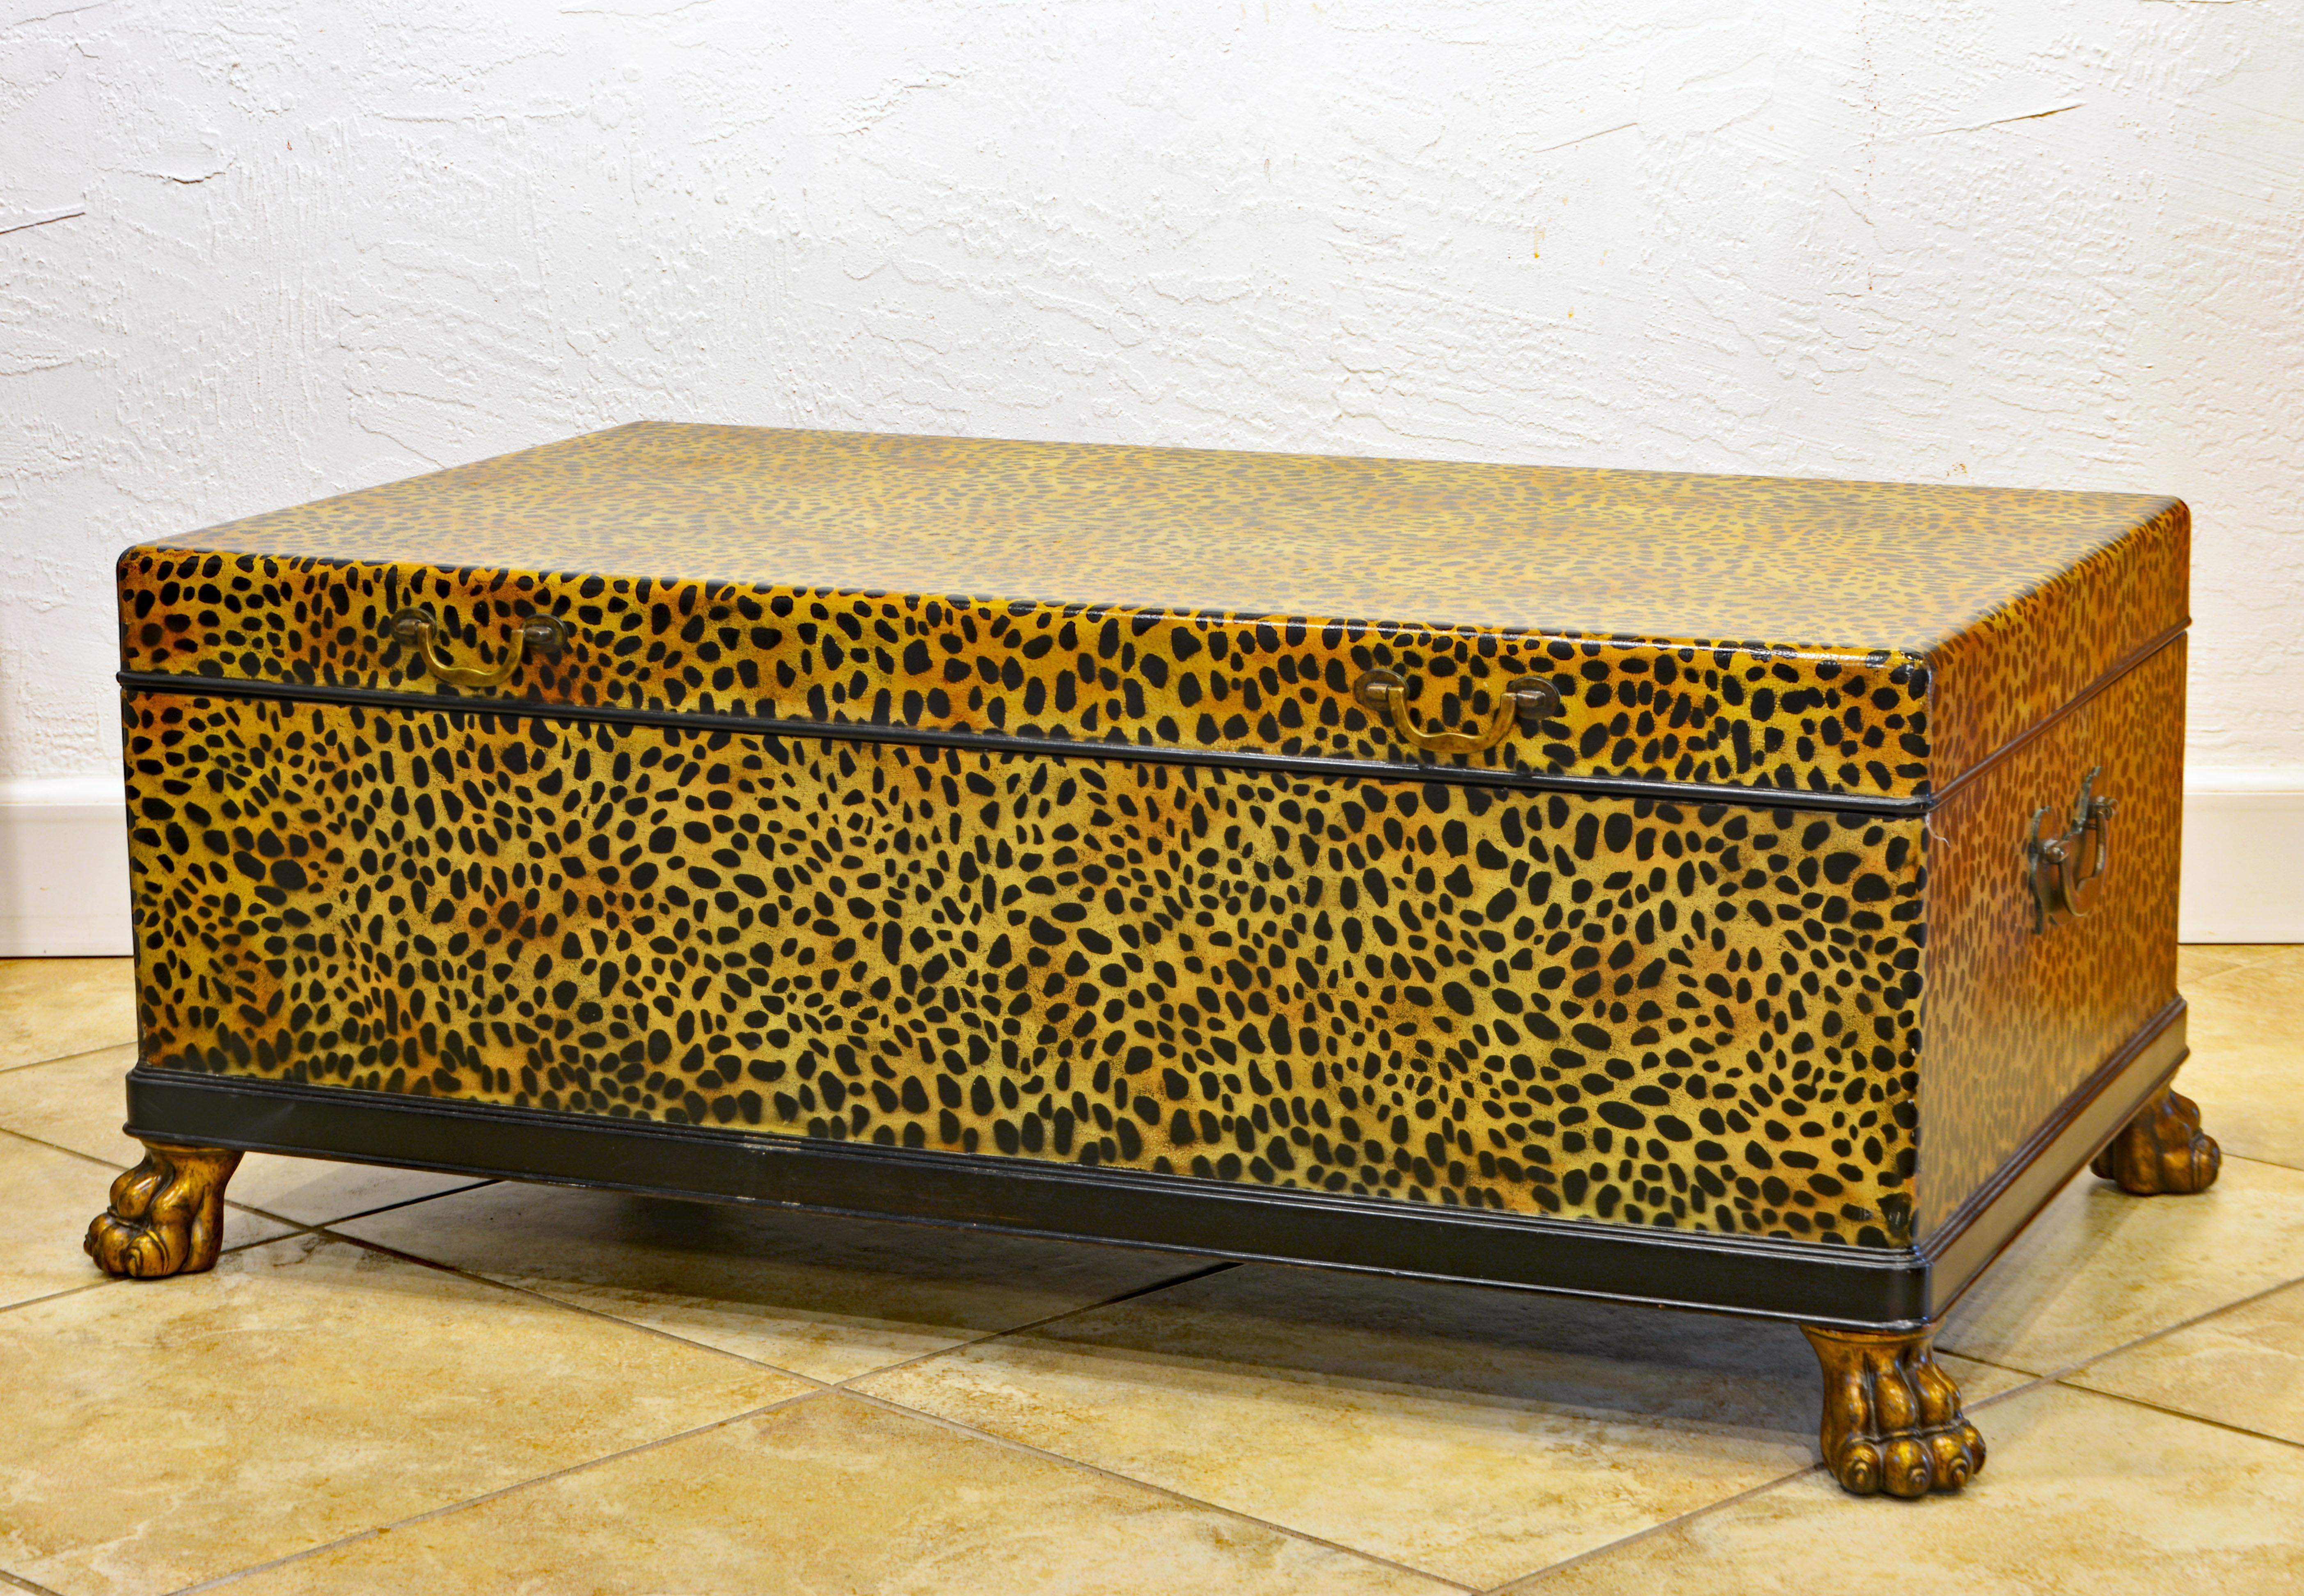 This exotic 'Panthera' cocktail table by Henry Link for Lexington is made of wood and covered with hand painted leopard style animal skin and lacquer. The lid opens up to a ventilated black painted interior. The four well modeled paw feet and the